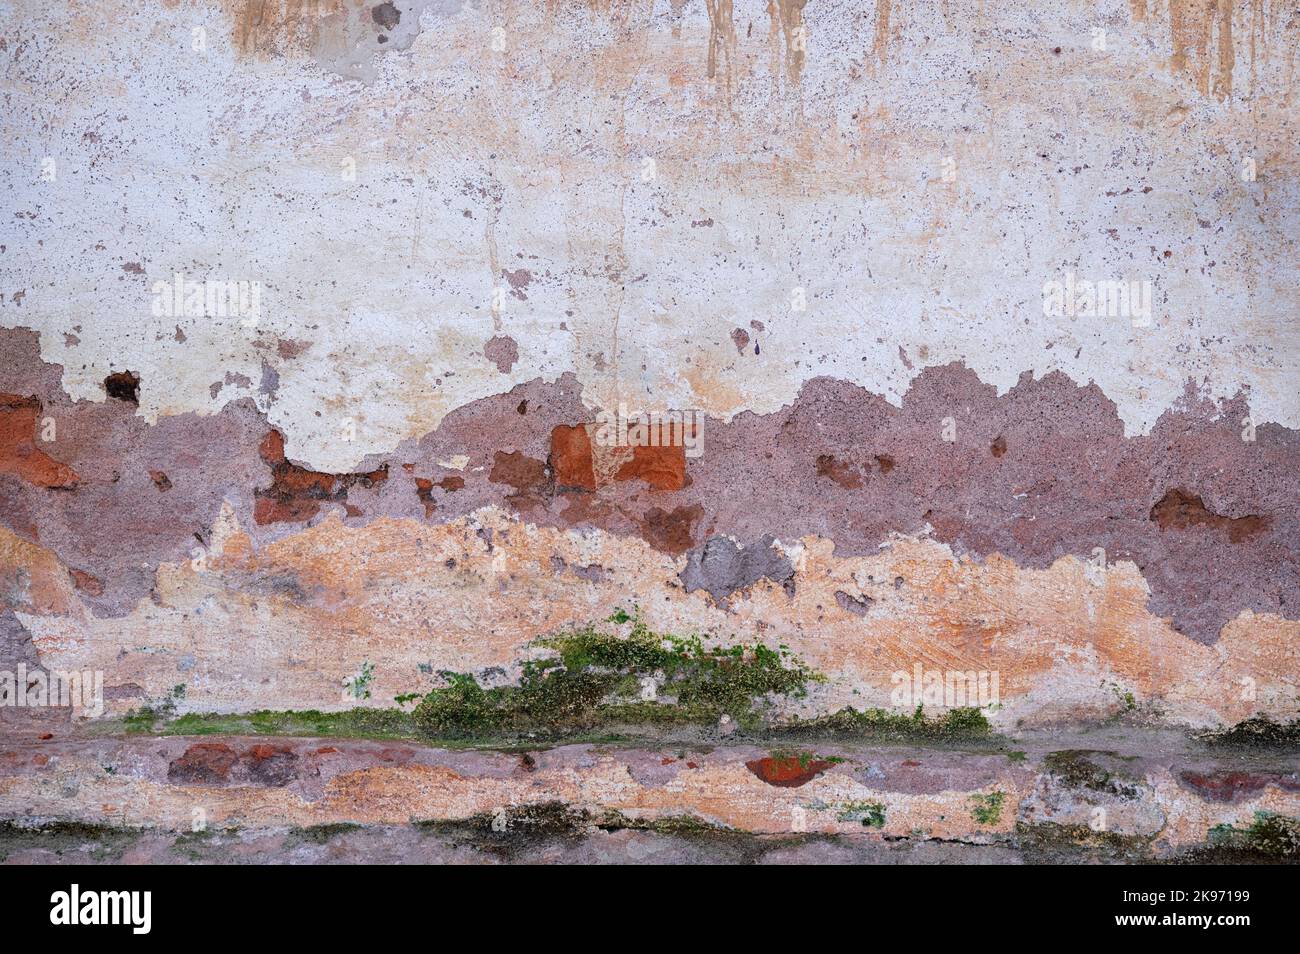 Grunge old plaster wall background,Weathered building facade with old damaged plaster,grunge brick wall texture distressed wall surface Stock Photo